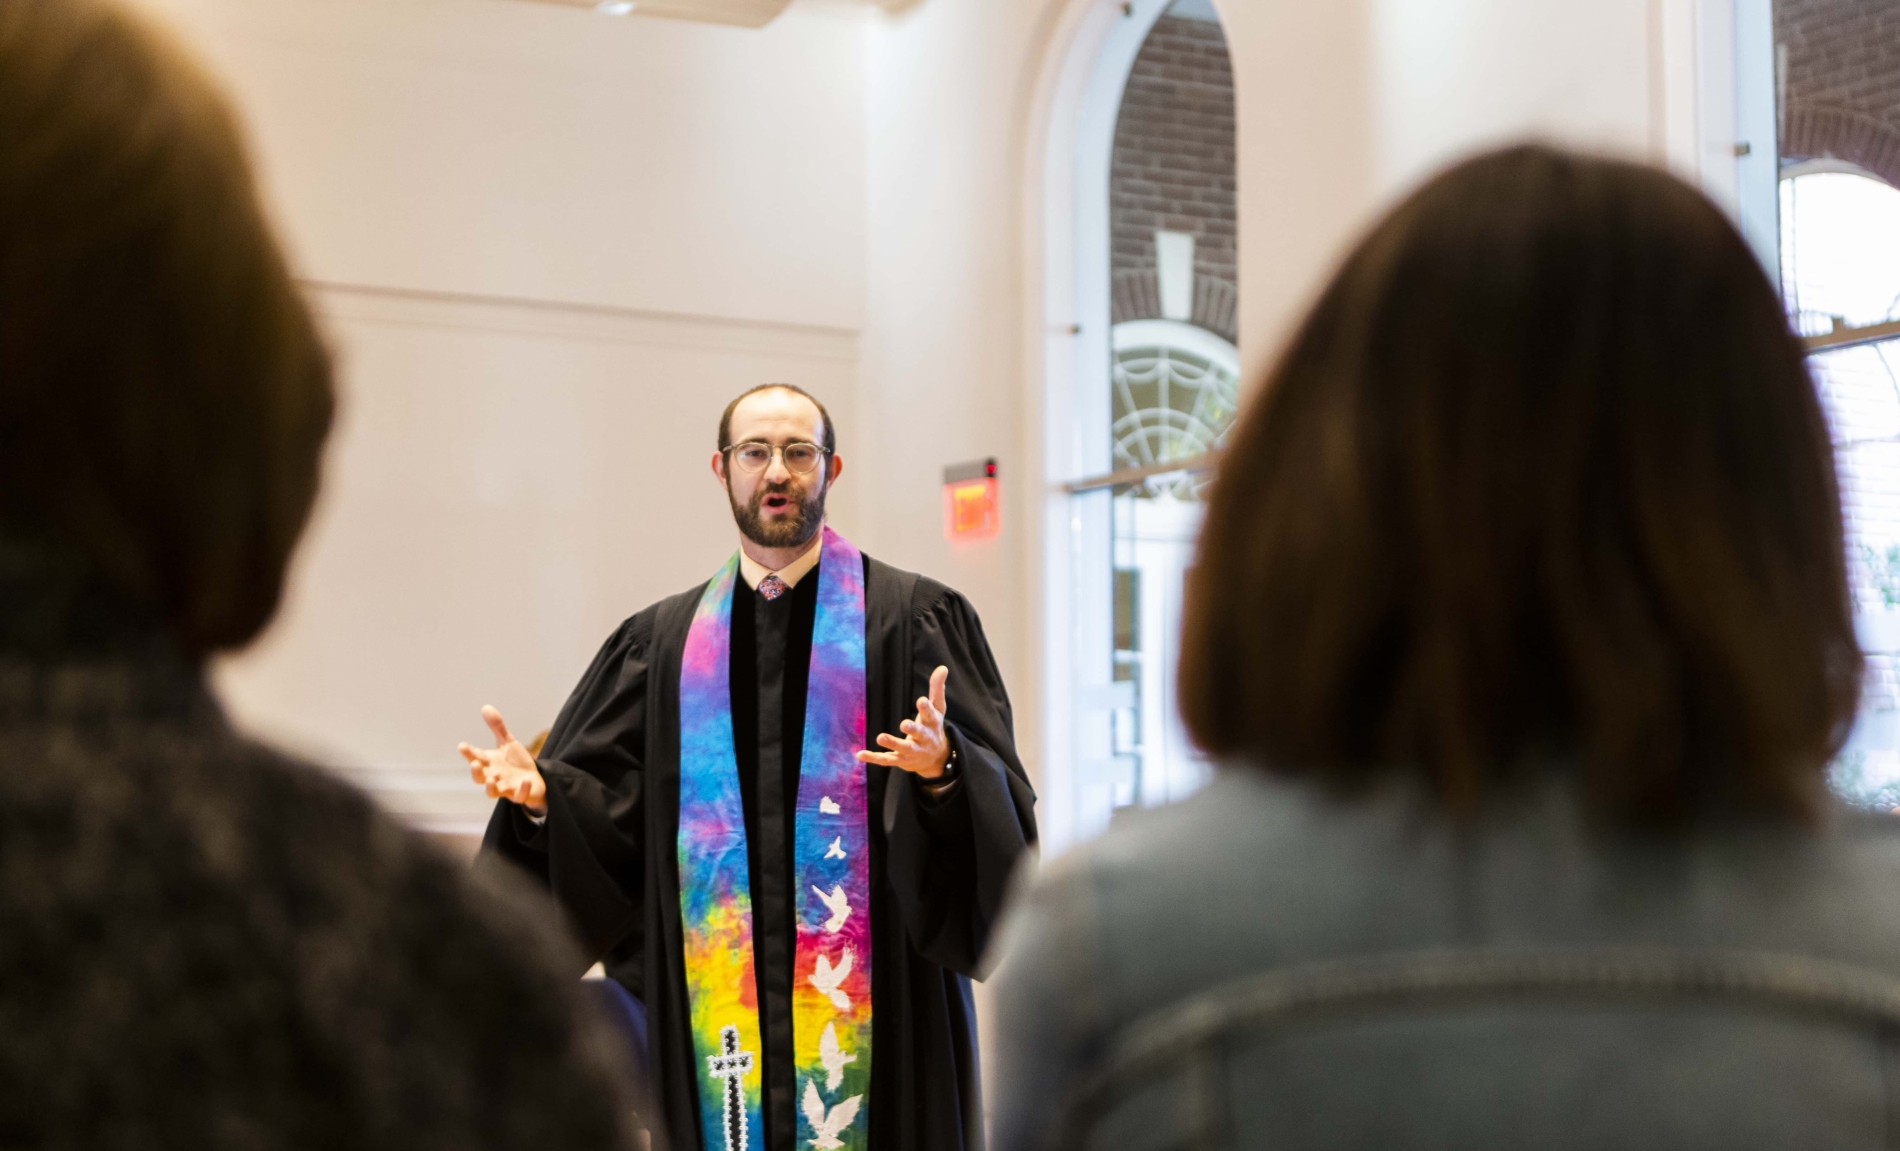 Bob Feeny, pastoral resident, preaches to people in the chapel